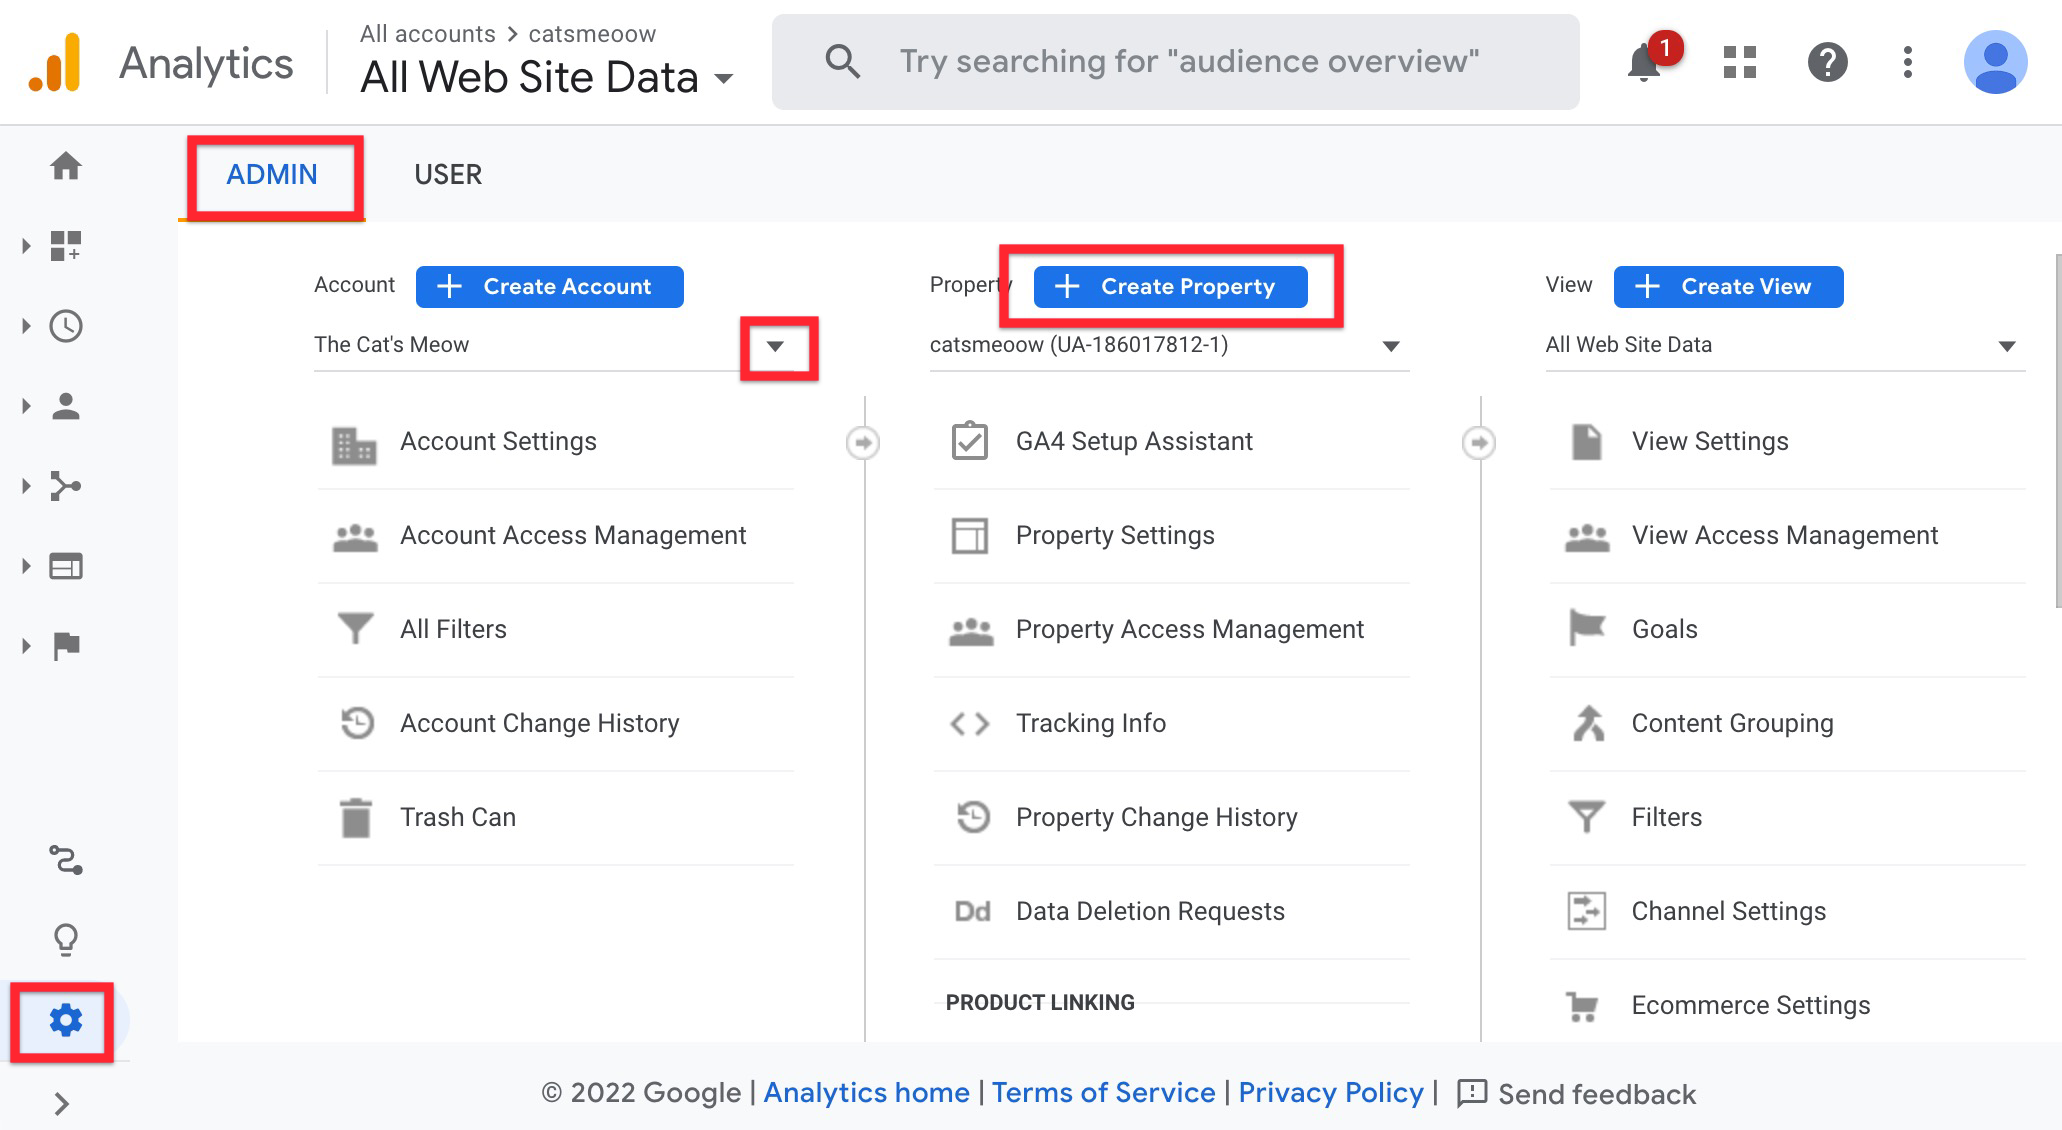 The screen shows the admin view of a Google Analytics account. From the left side of the page, the SETTINGS icon is circled. Then, at the top of the page, the ADMIN tab is circled. The user has selected an account from under the ACCOUNT menu, then the CREATE PROPERTY BUTTON is circled.